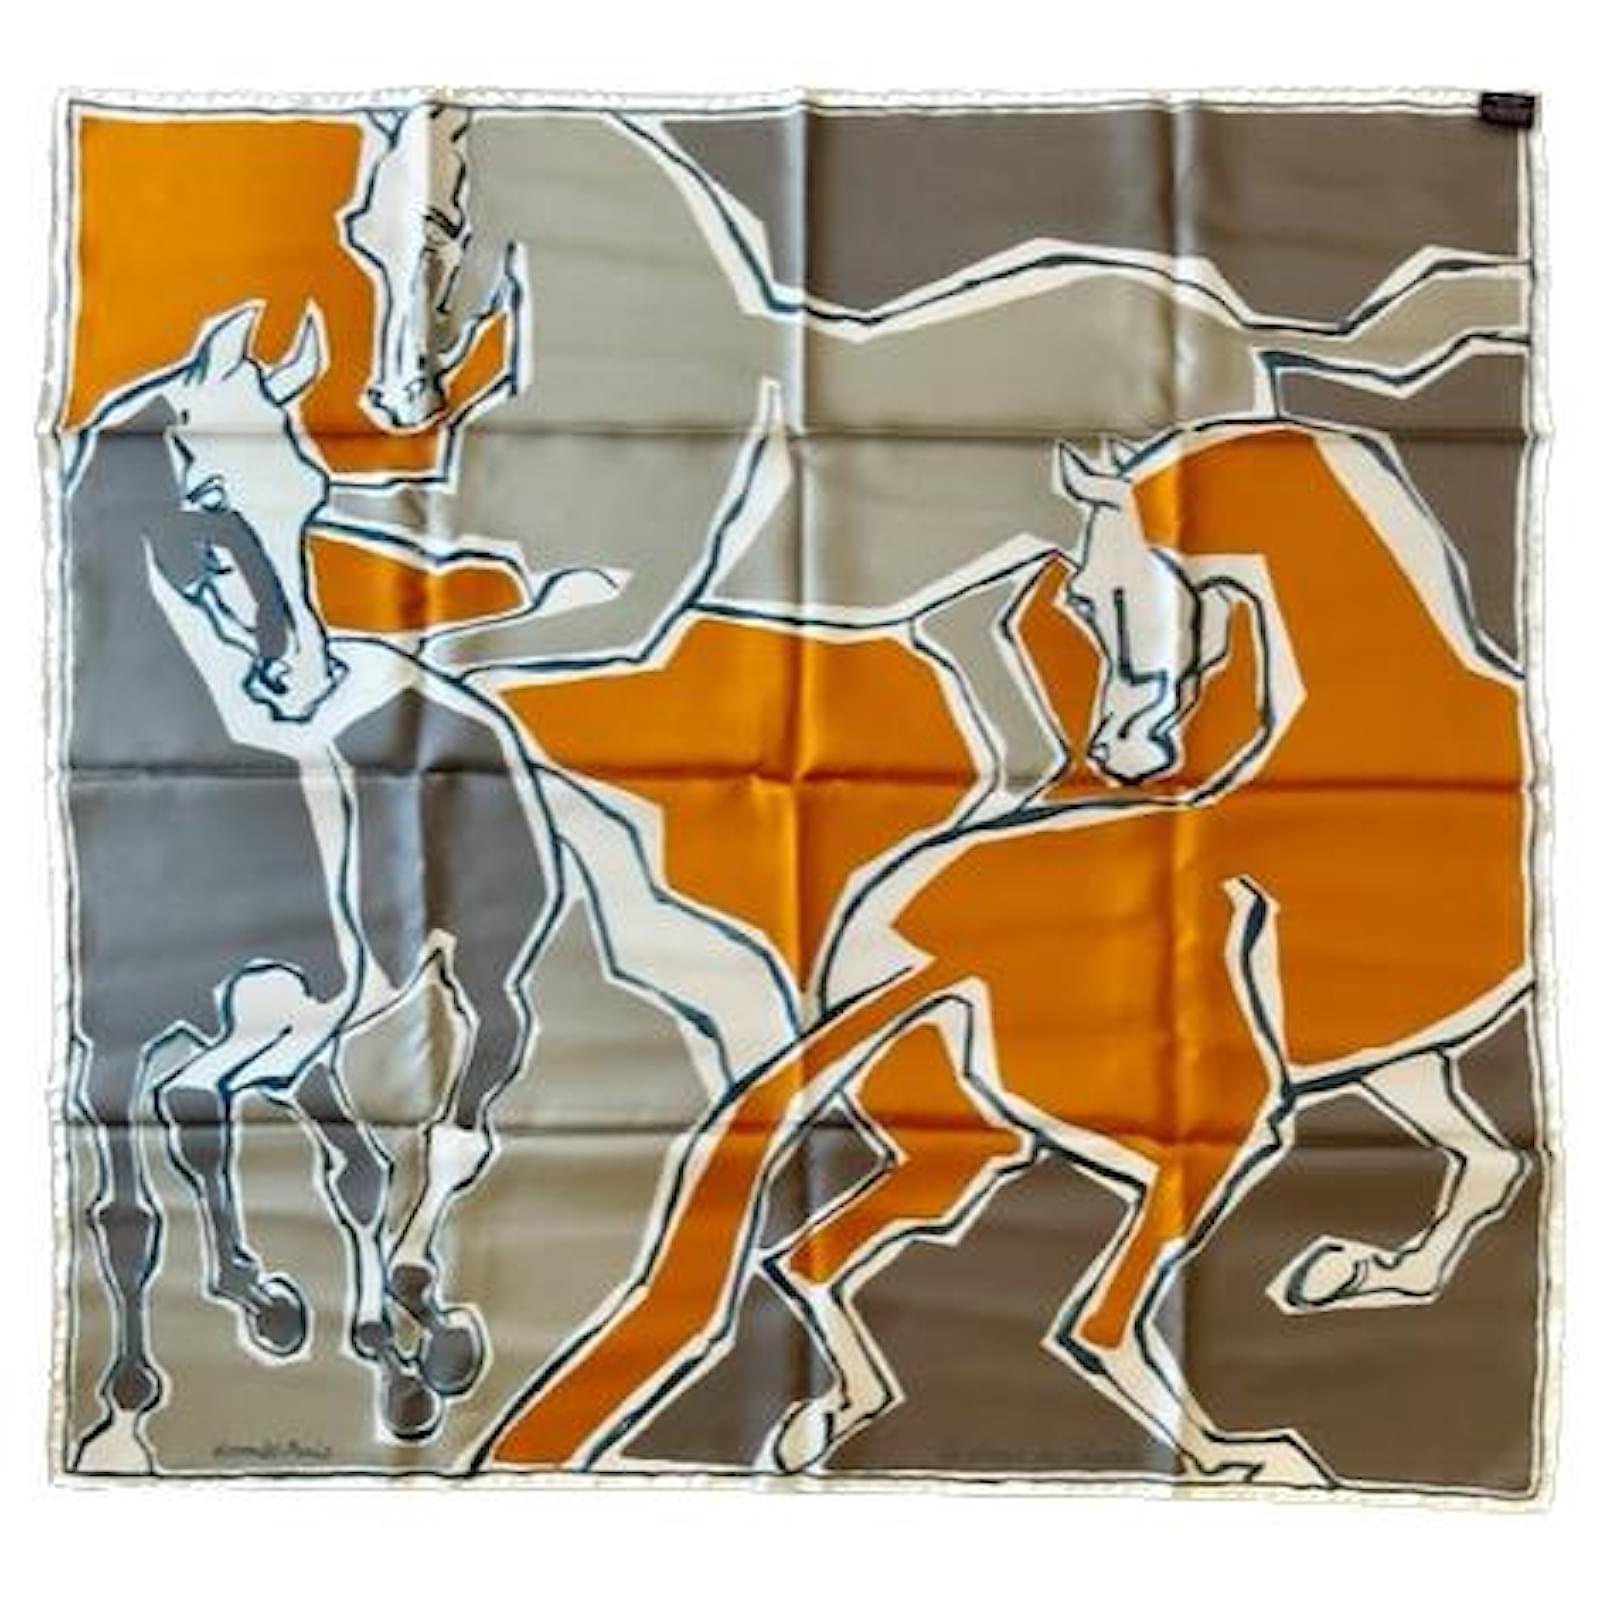 Hermès Hermes : Rare lined Sided Square The Dance of the Horses